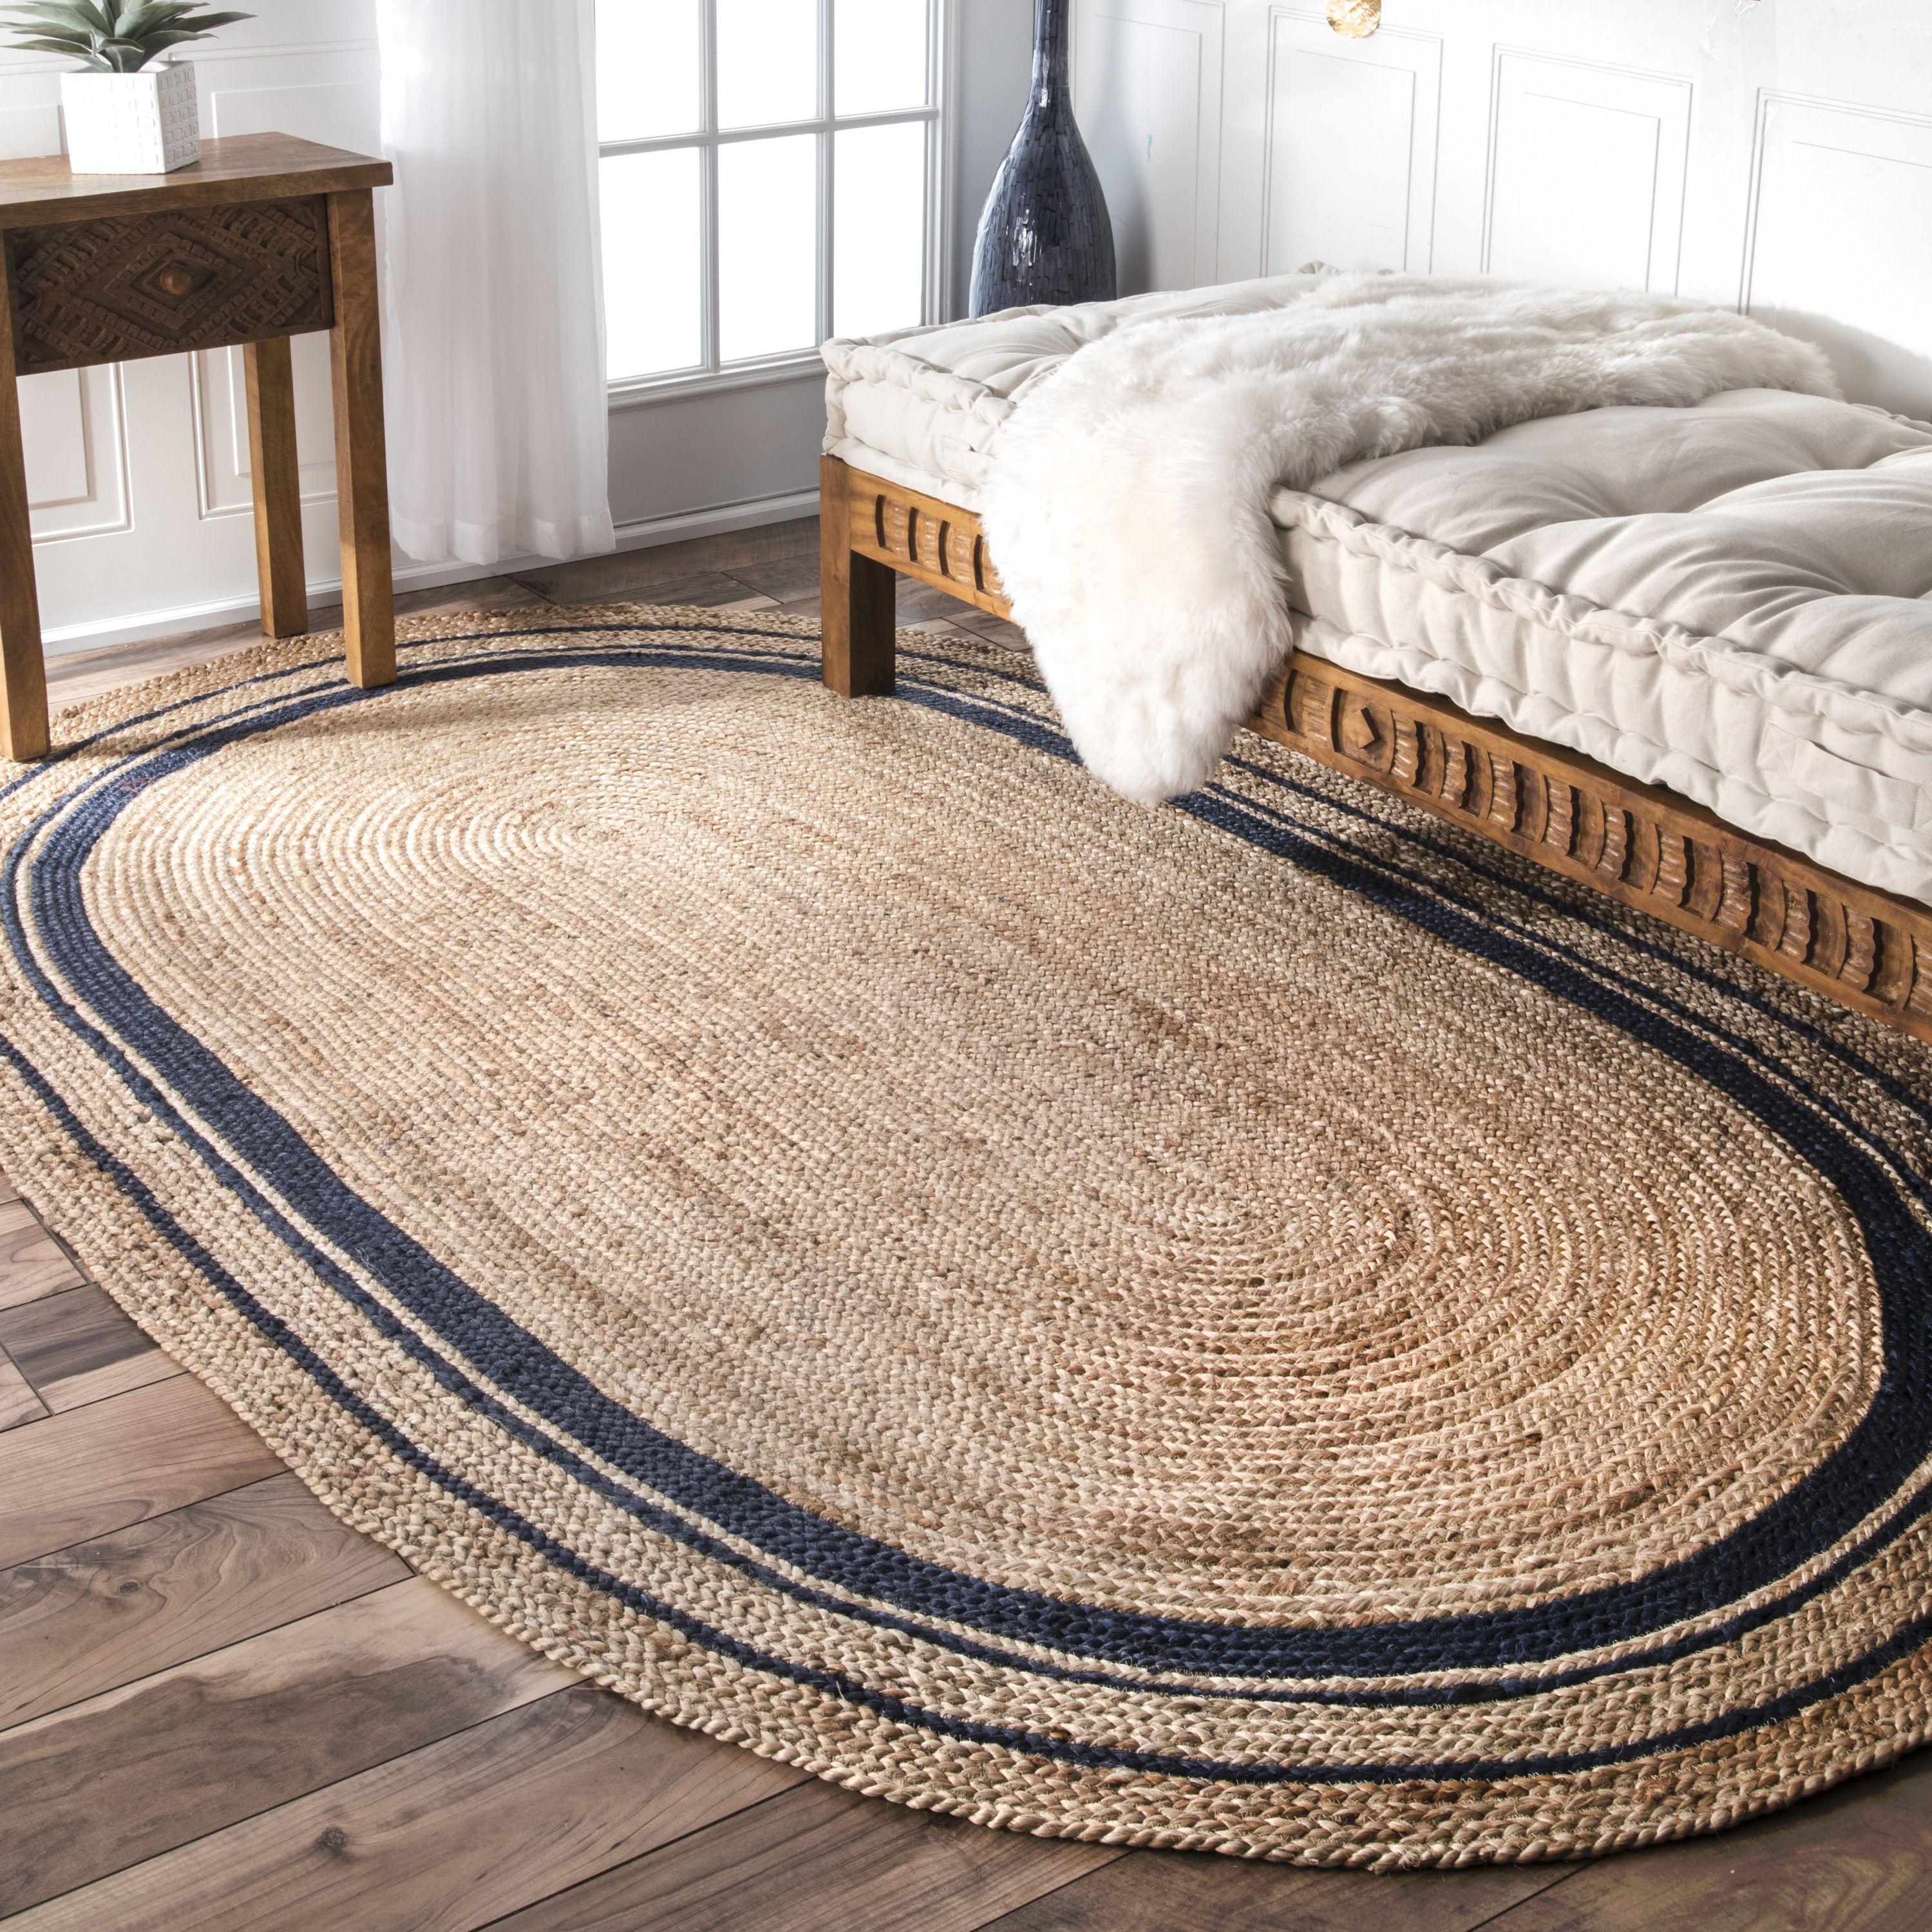 Nuloom 5 X 8 Braided Jute Navy Oval Indoor Border Area Rug In The Rugs  Department At Lowes With Oval Rugs (View 6 of 15)